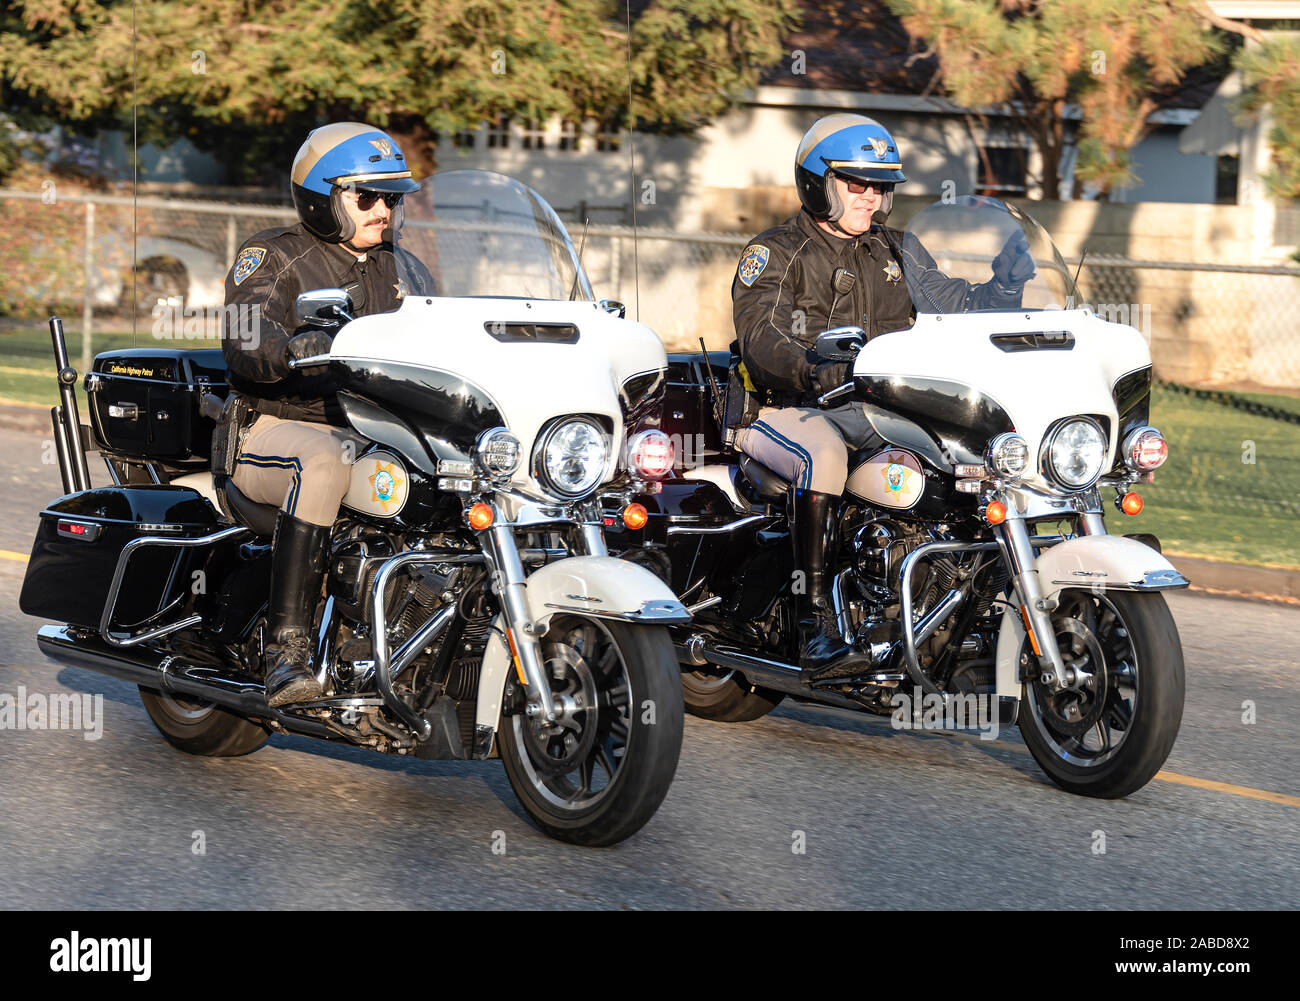 Motorcycle Highway Patrol High Resolution Stock Photography and Images -  Alamy